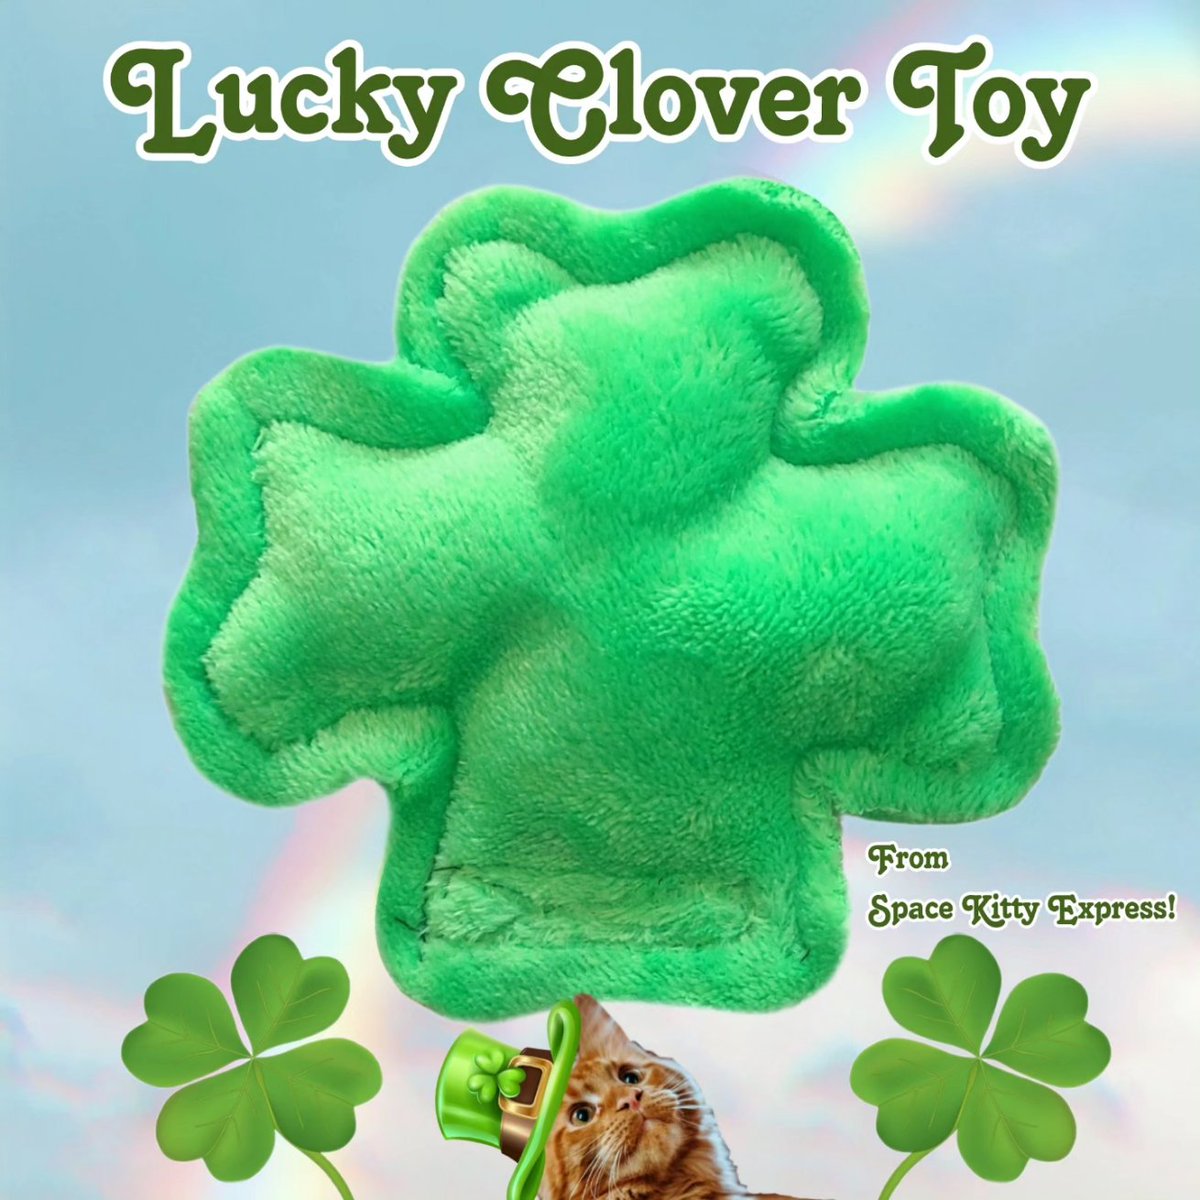 Wanna bring your kitty some good luck? Check out our lucky clover toys! These come filled with your choice of Catnip, Silver Vine, Tatarian Honeysuckle, Valerian Root or a blend! 😺🍀 Find them at spacekittyexpress.com 🍀😺 Hope you all have a lovely St. Patrick's Day! 💚